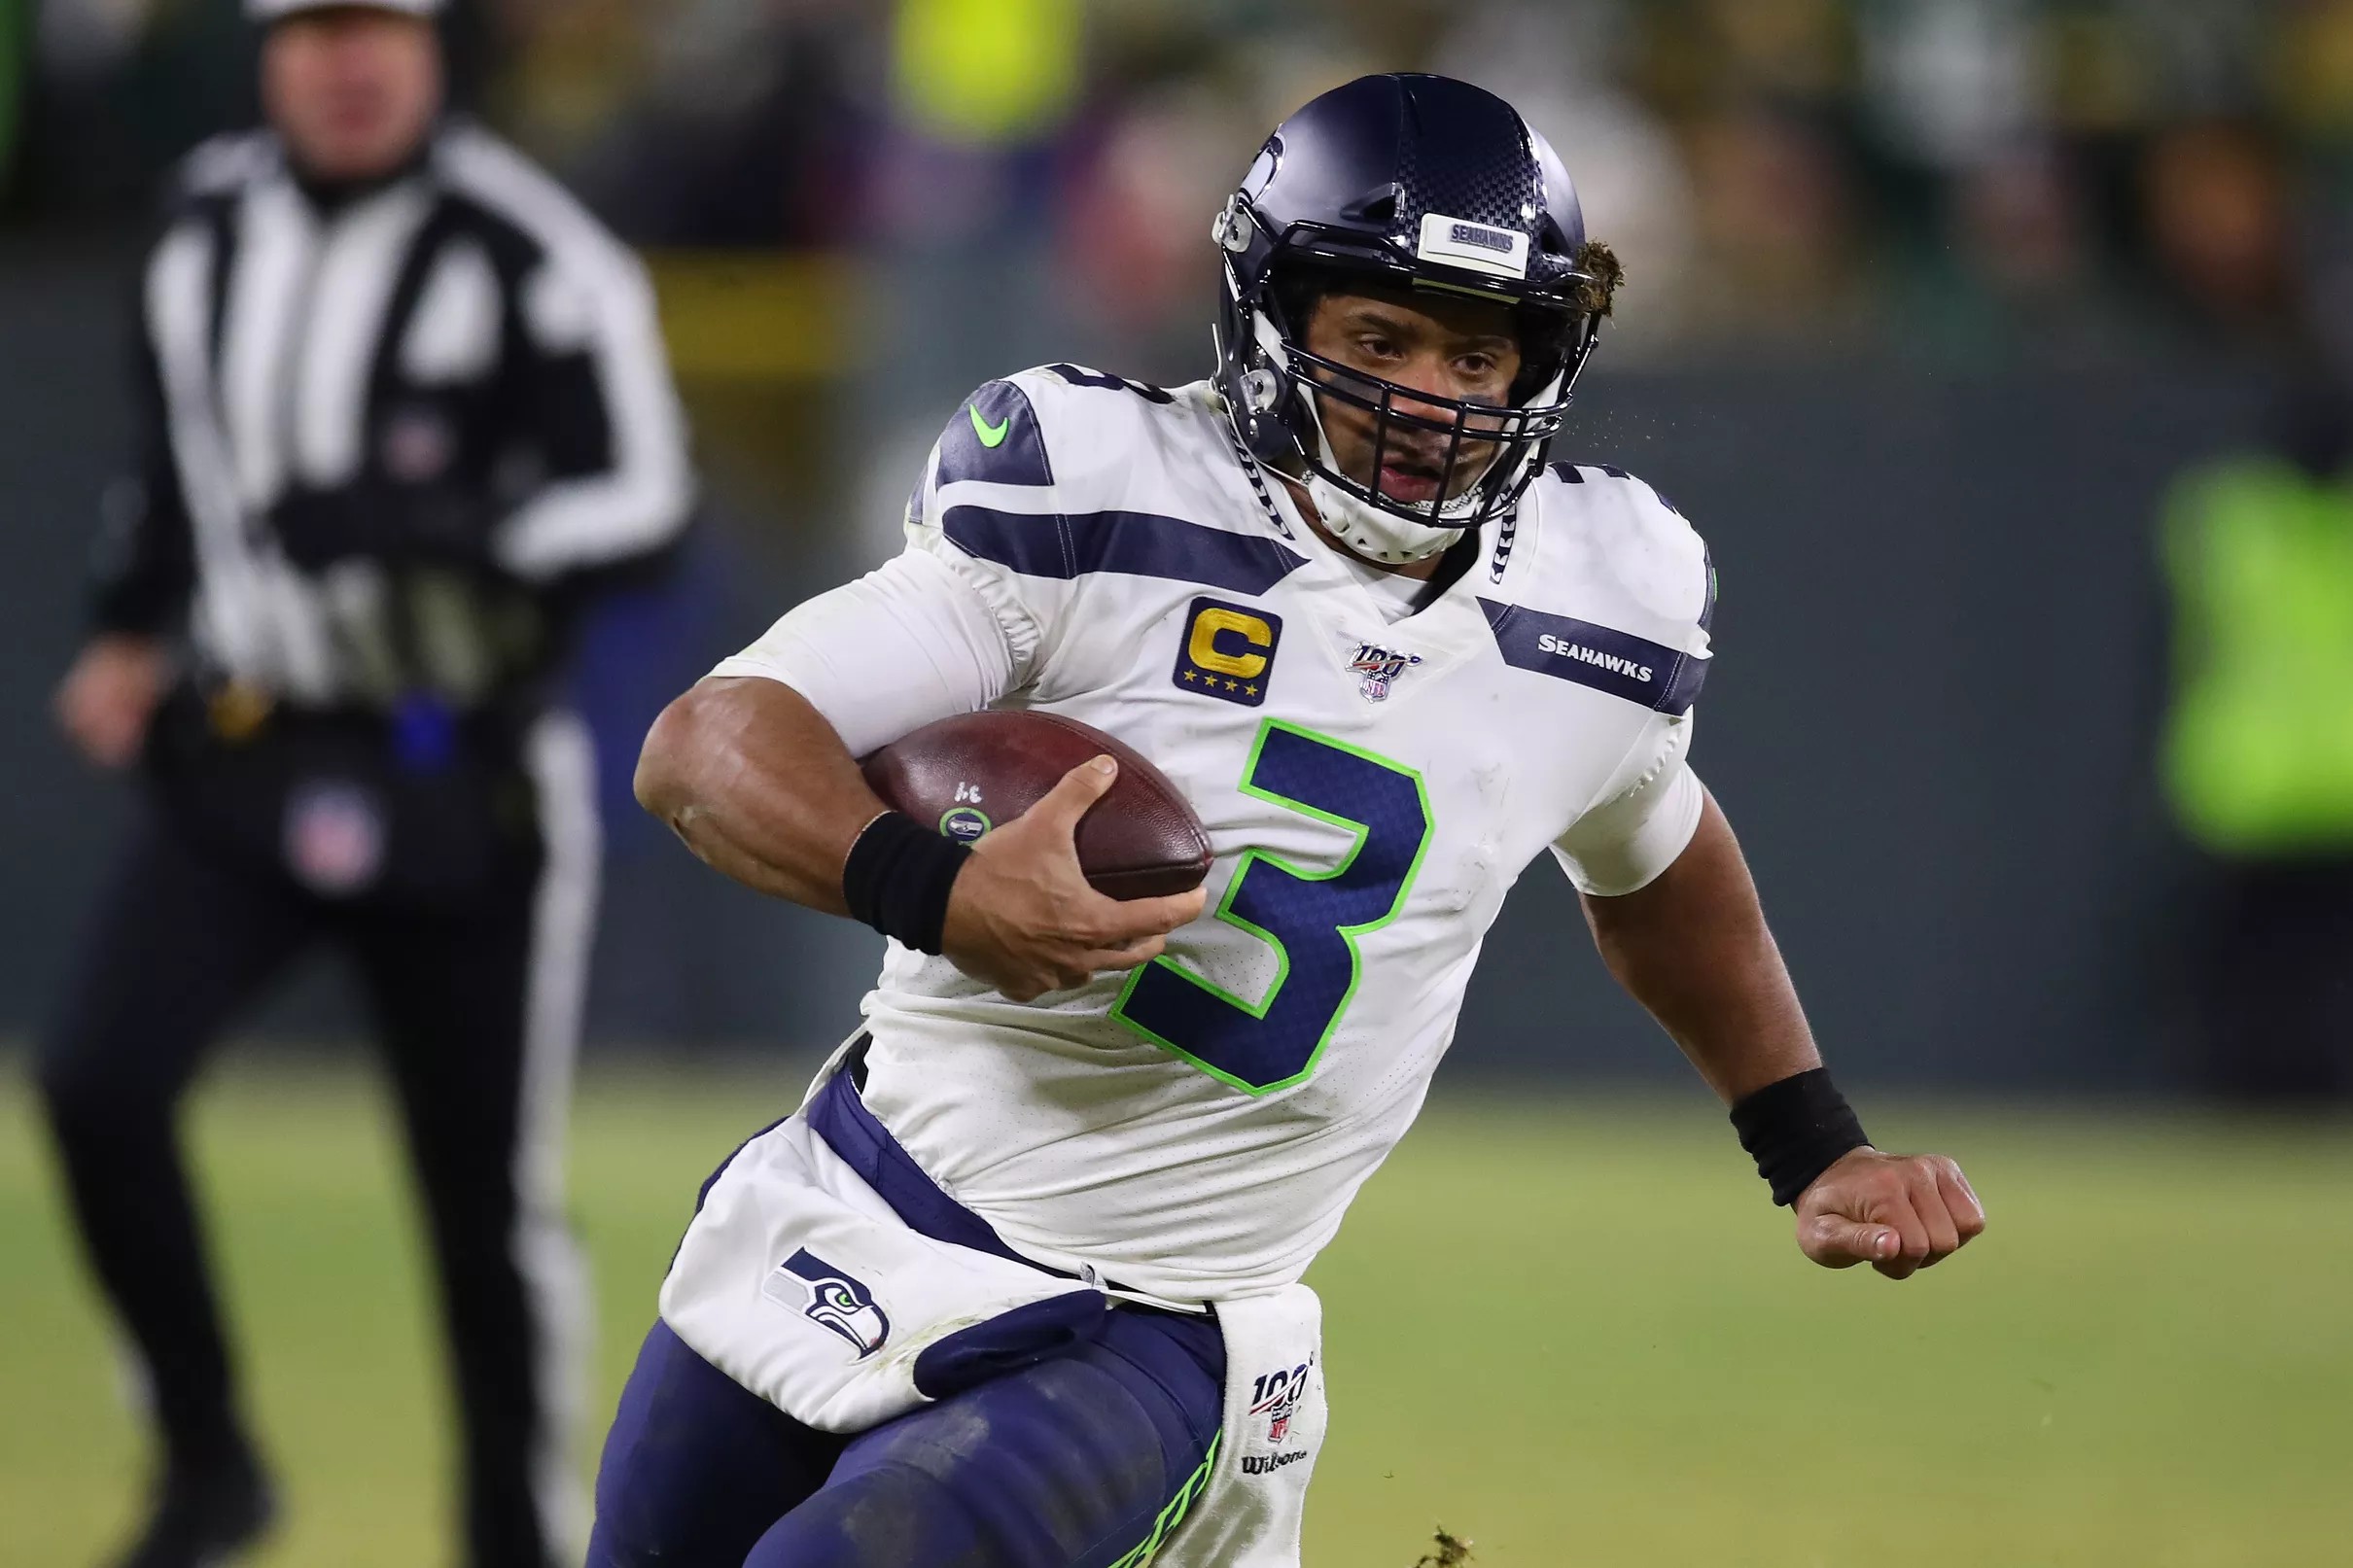 Century Links 4/6 Will Seahawks Draft a QB this year?